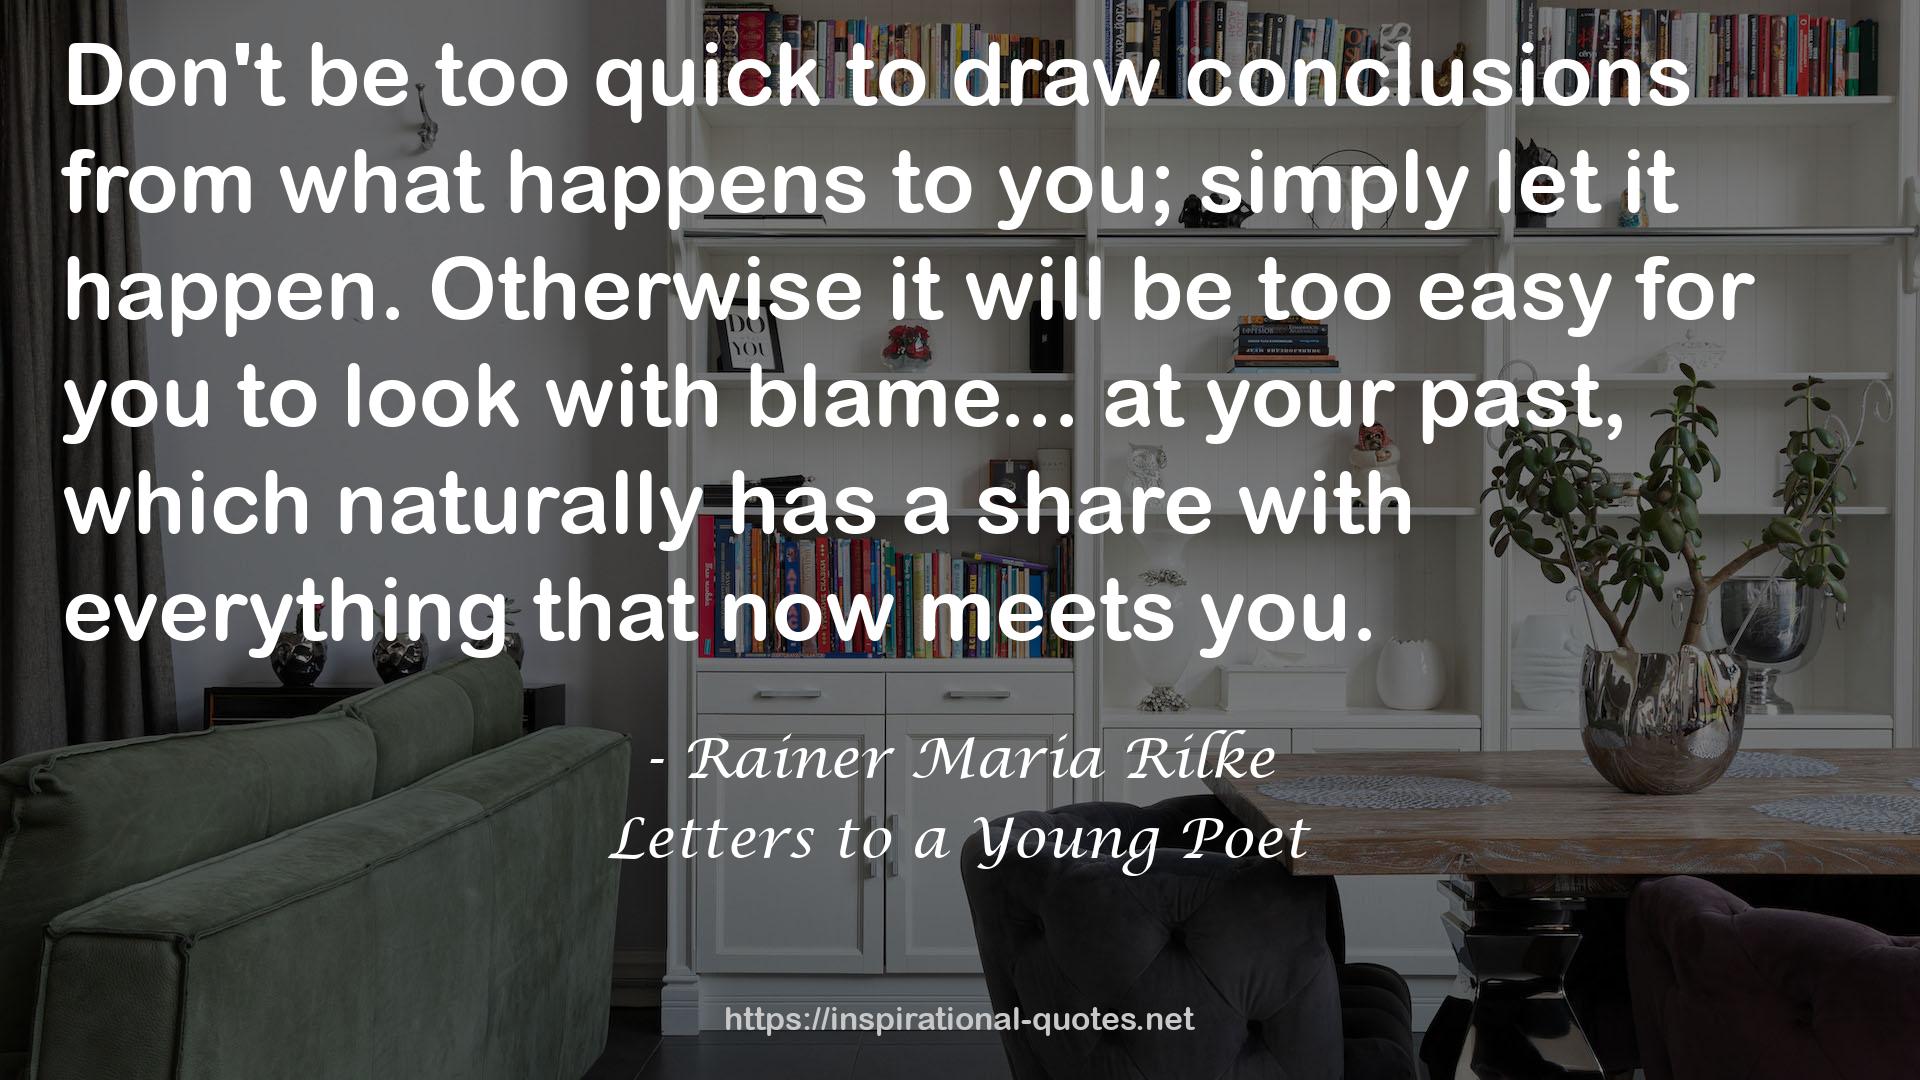 Letters to a Young Poet QUOTES